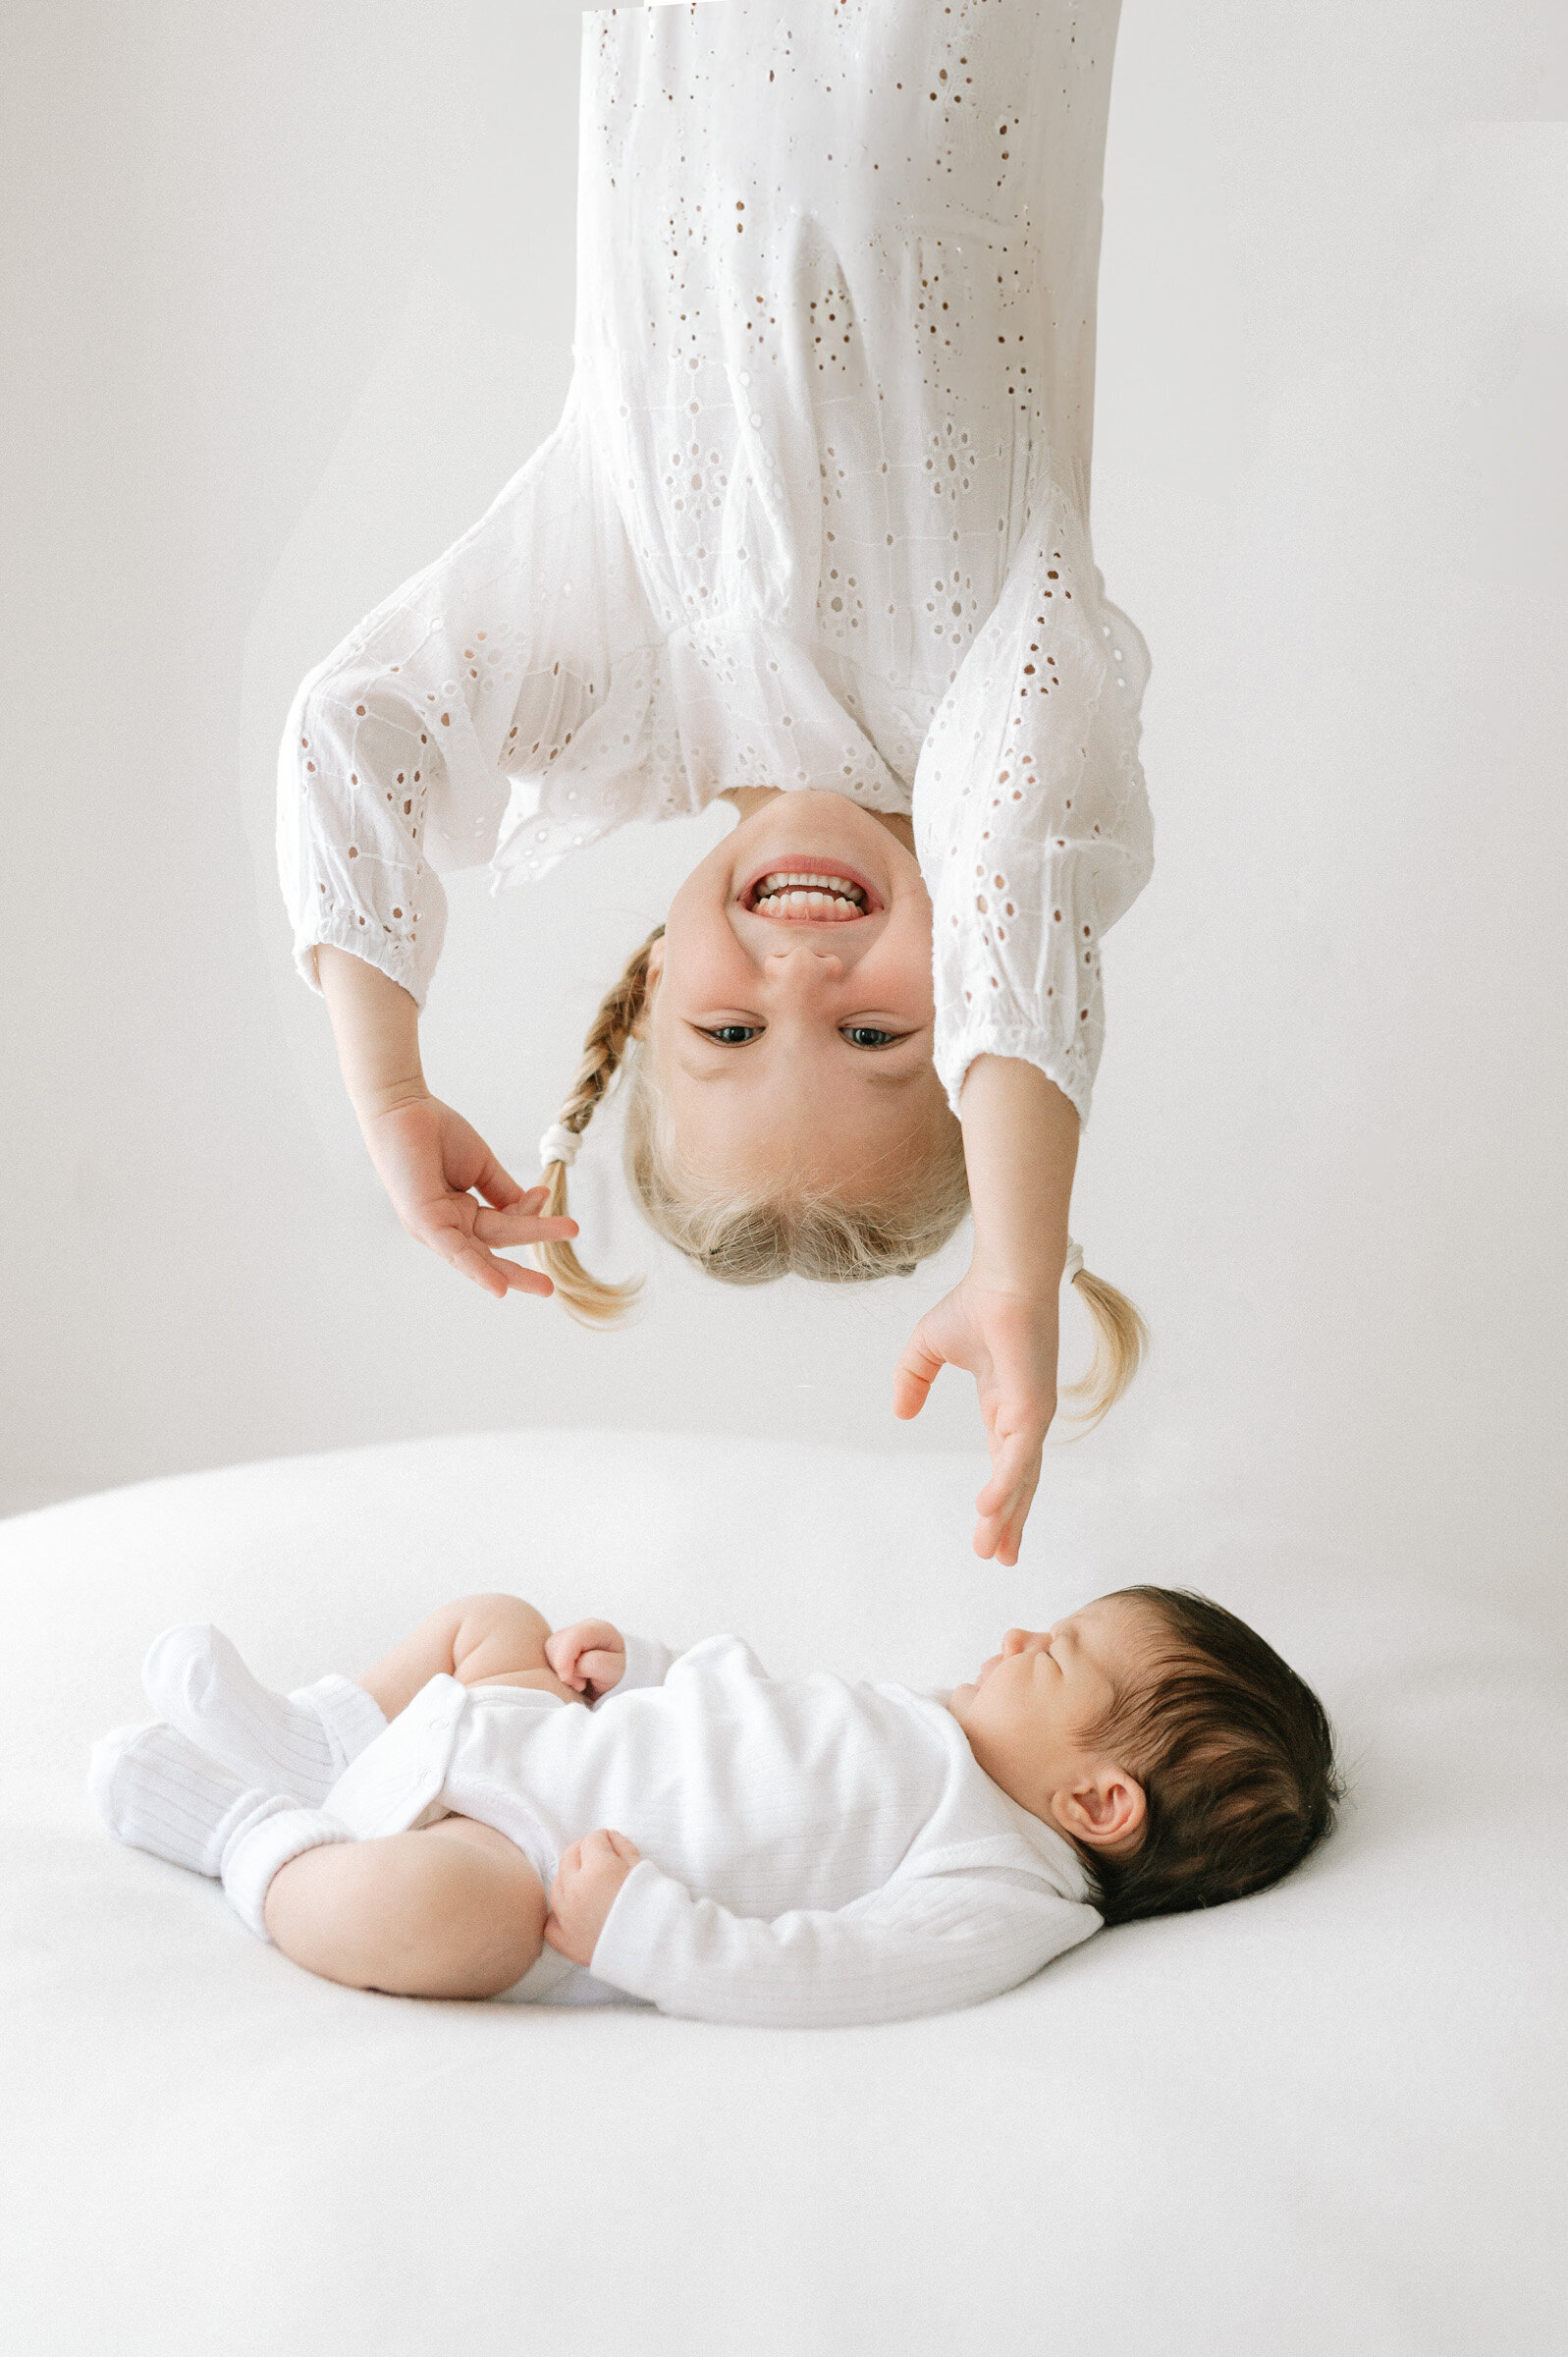 Big sister leaning over her baby sister in York studio